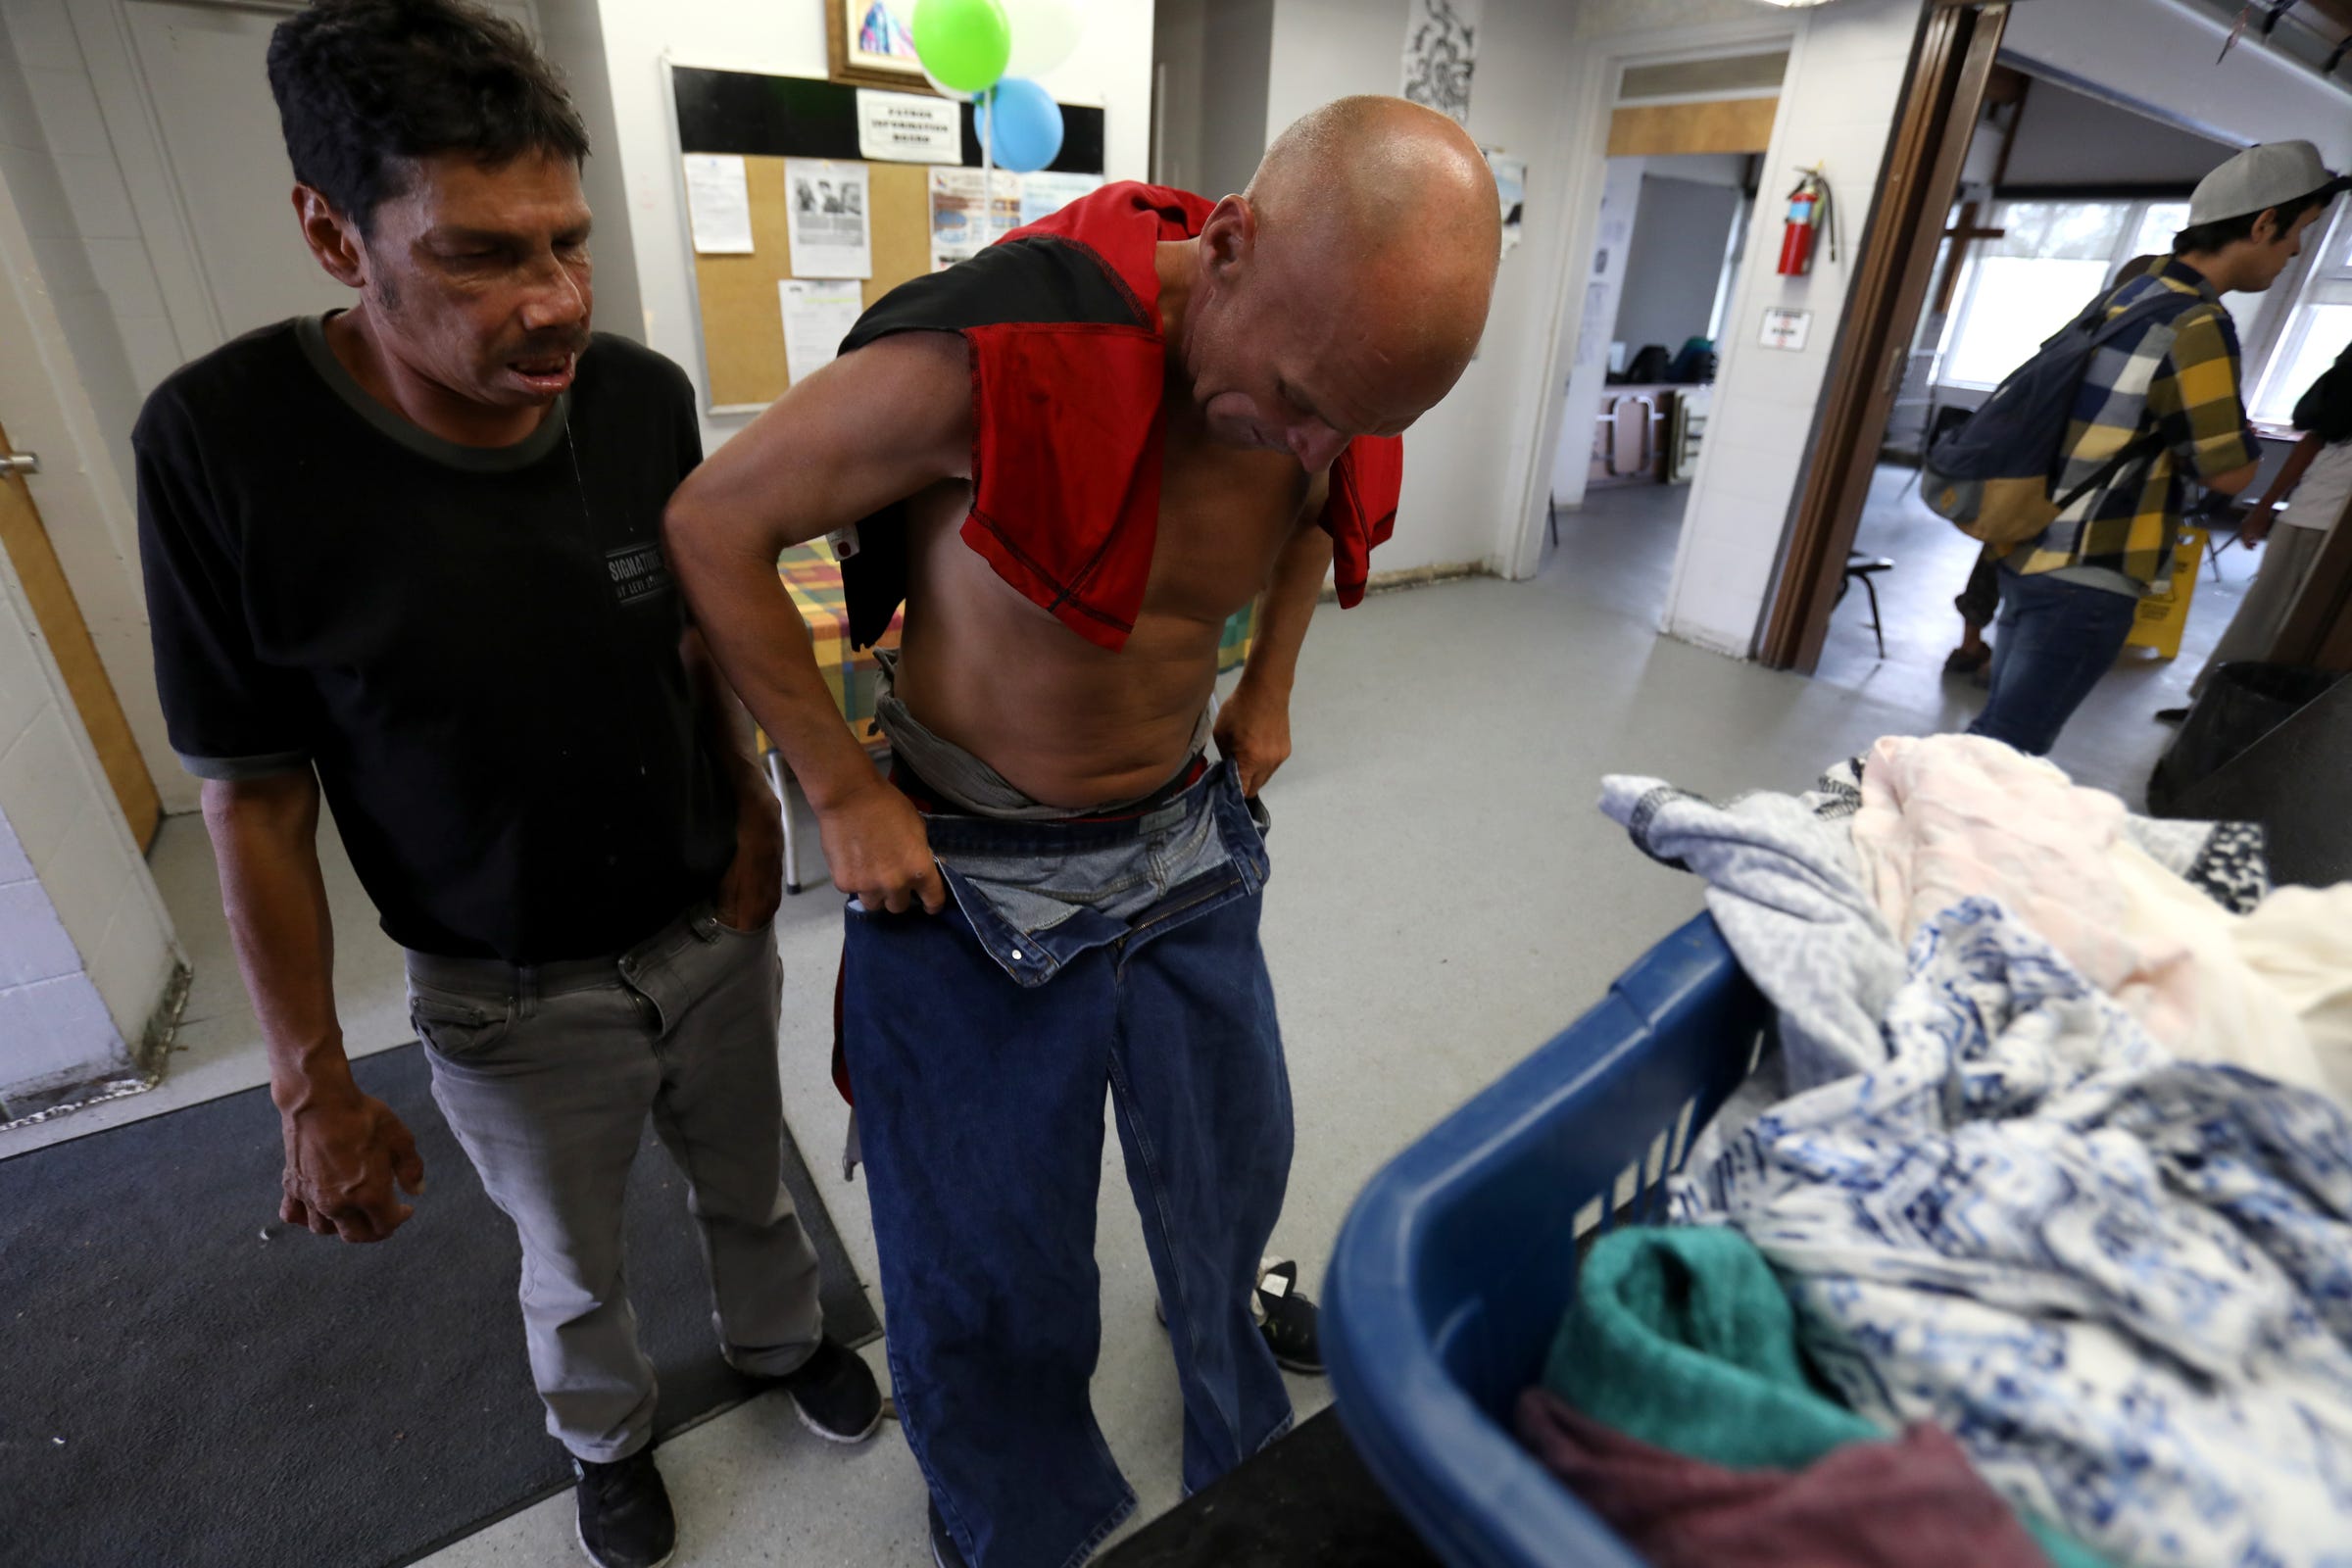 Joe Murphy looks for clothes at the Fellowship Centre in Kenora, Ontario, Canada on Wednesday, July 10, 2019 Living on the streets Murphy relies on the center often for food, coffee, clothing and showers.After living in a hotel in Kenora, Ontario, Canada set up by former NHL hockey players, former Detroit Red Wings player Joe Murphy is back on the streets of that city and homeless.